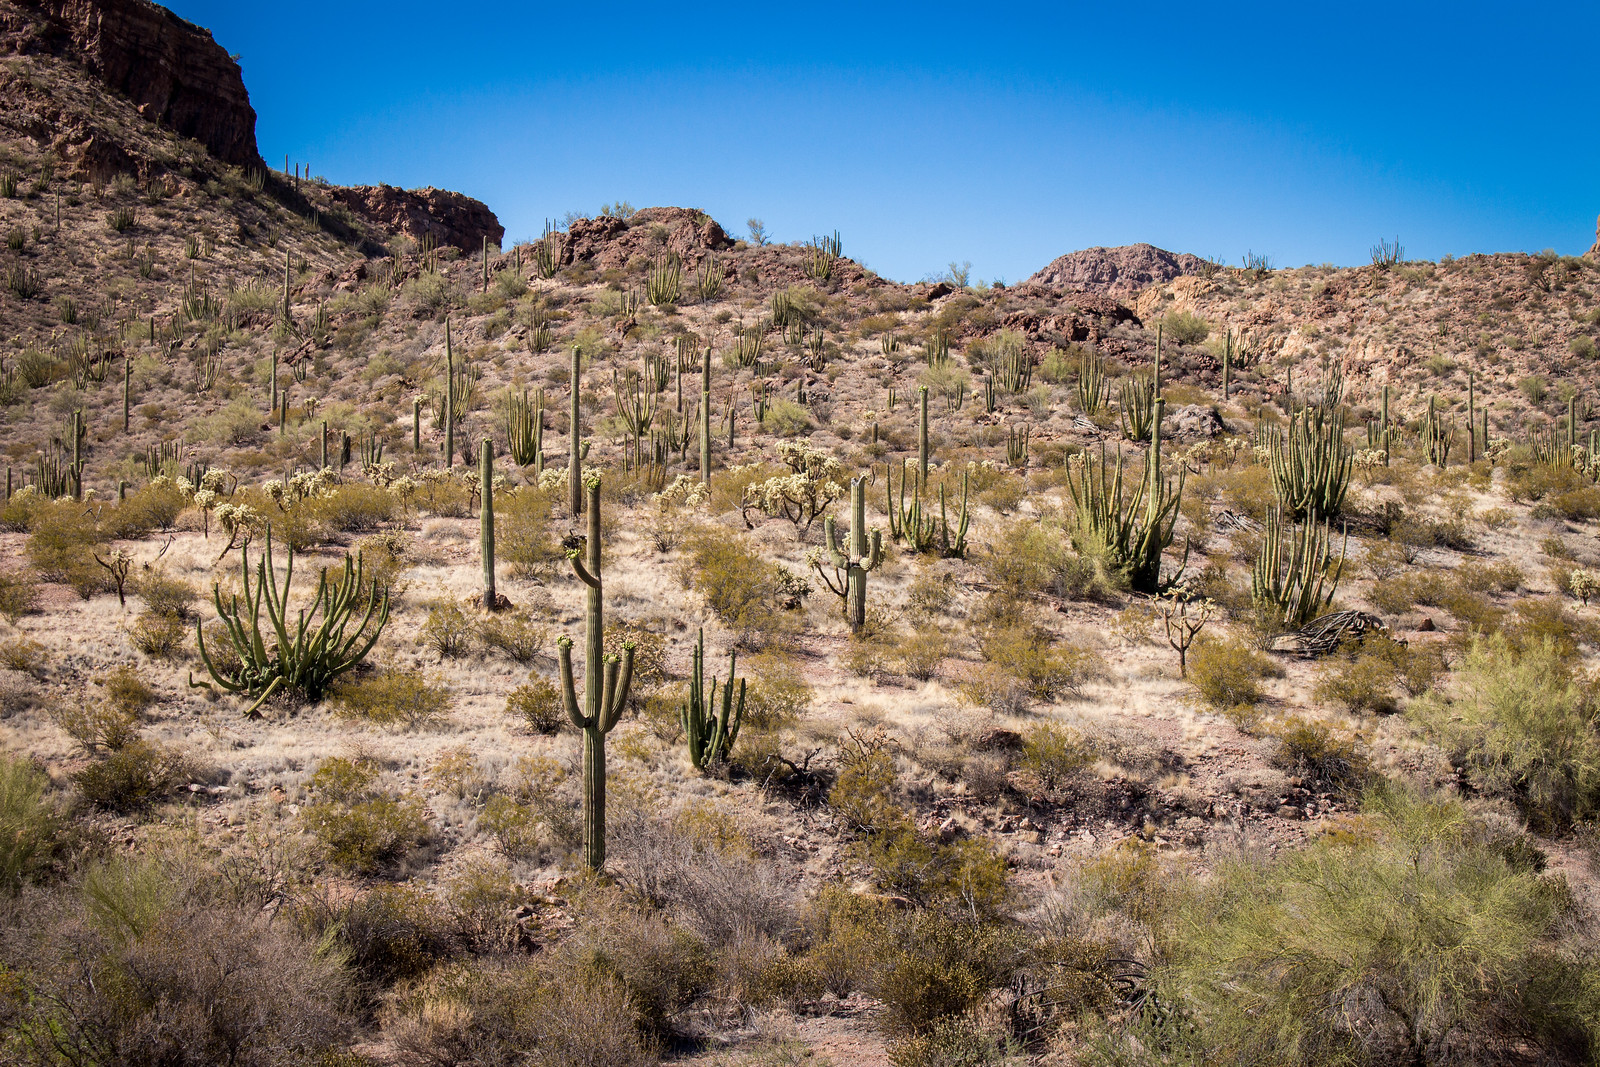 Thick landscape of multiple varieties of cactus and creosote bush on rugged terrain